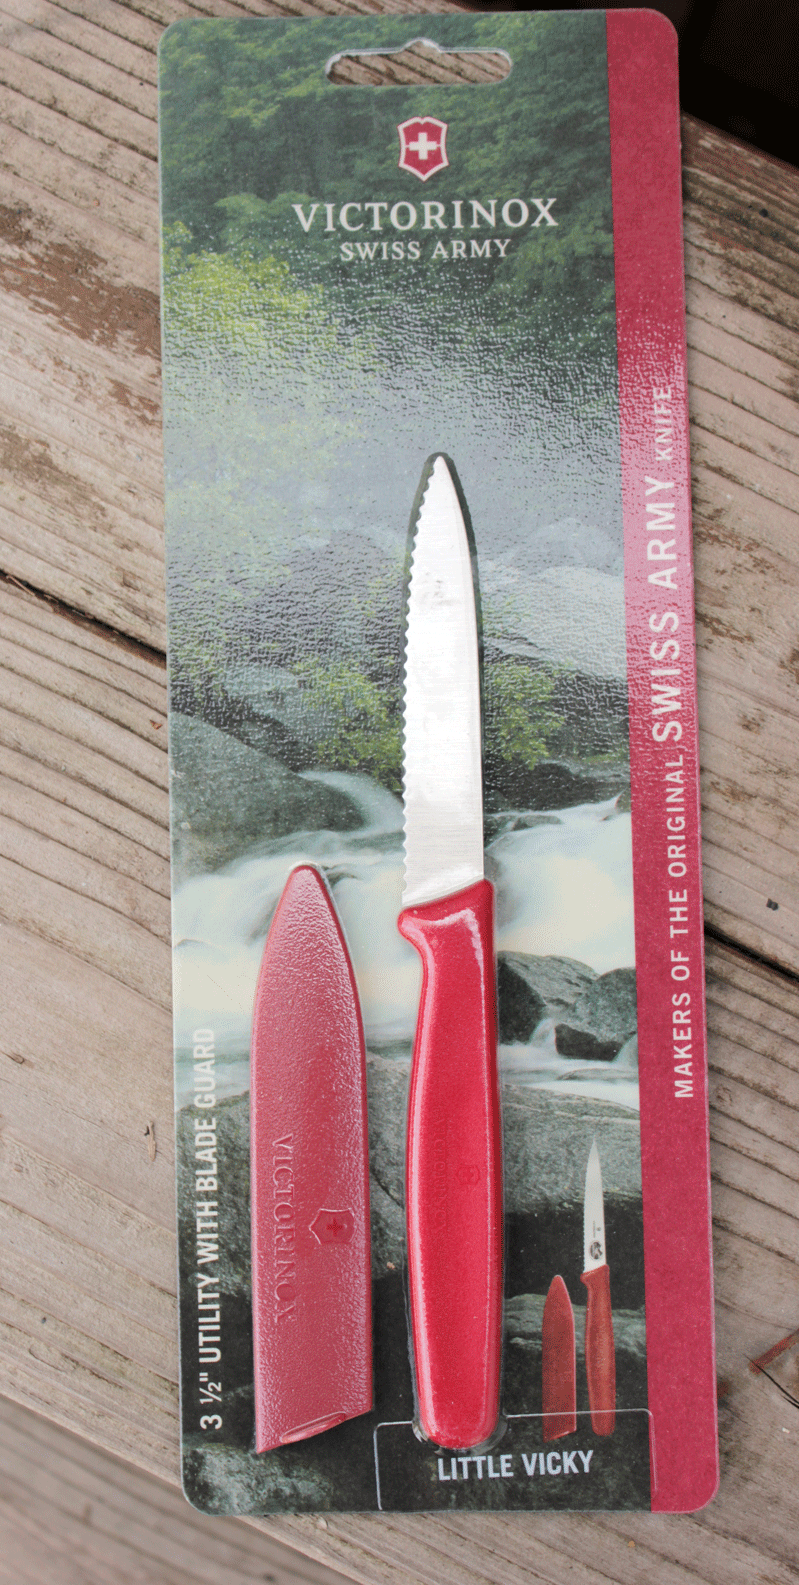 http://www.adamsknifeworks.com/store/images/images/victorinox-vicky(large).gif